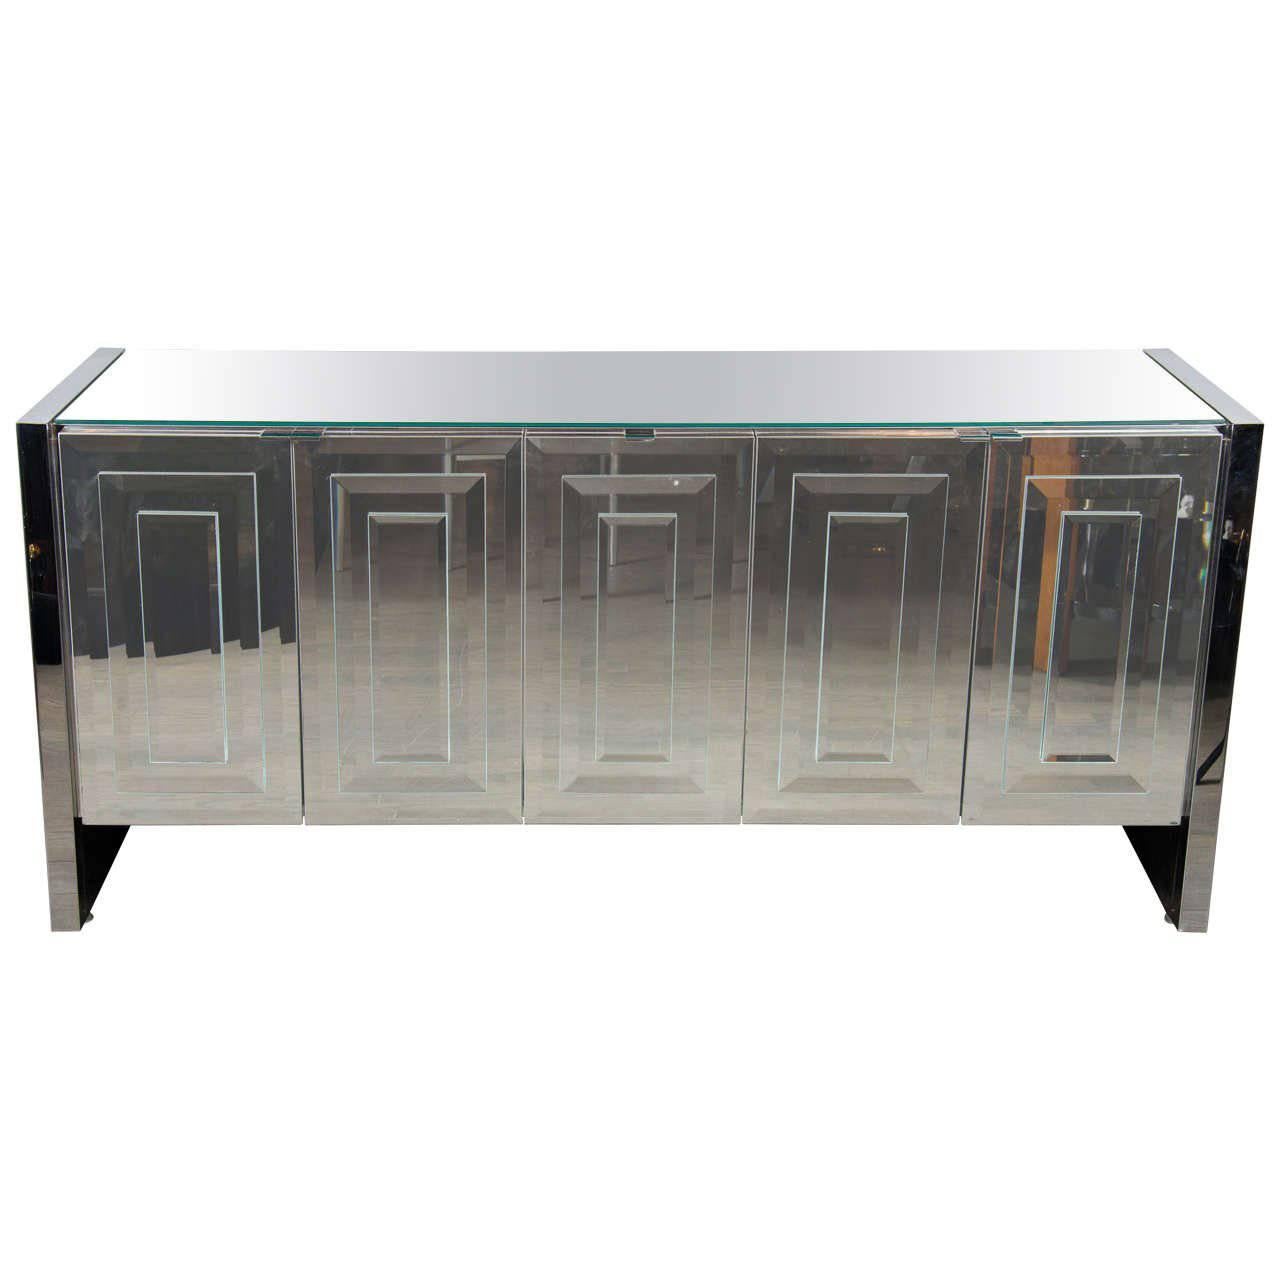 Italian Mid-Century Modern Mirrored & Chrome "Reflections" Sideboard by Ello